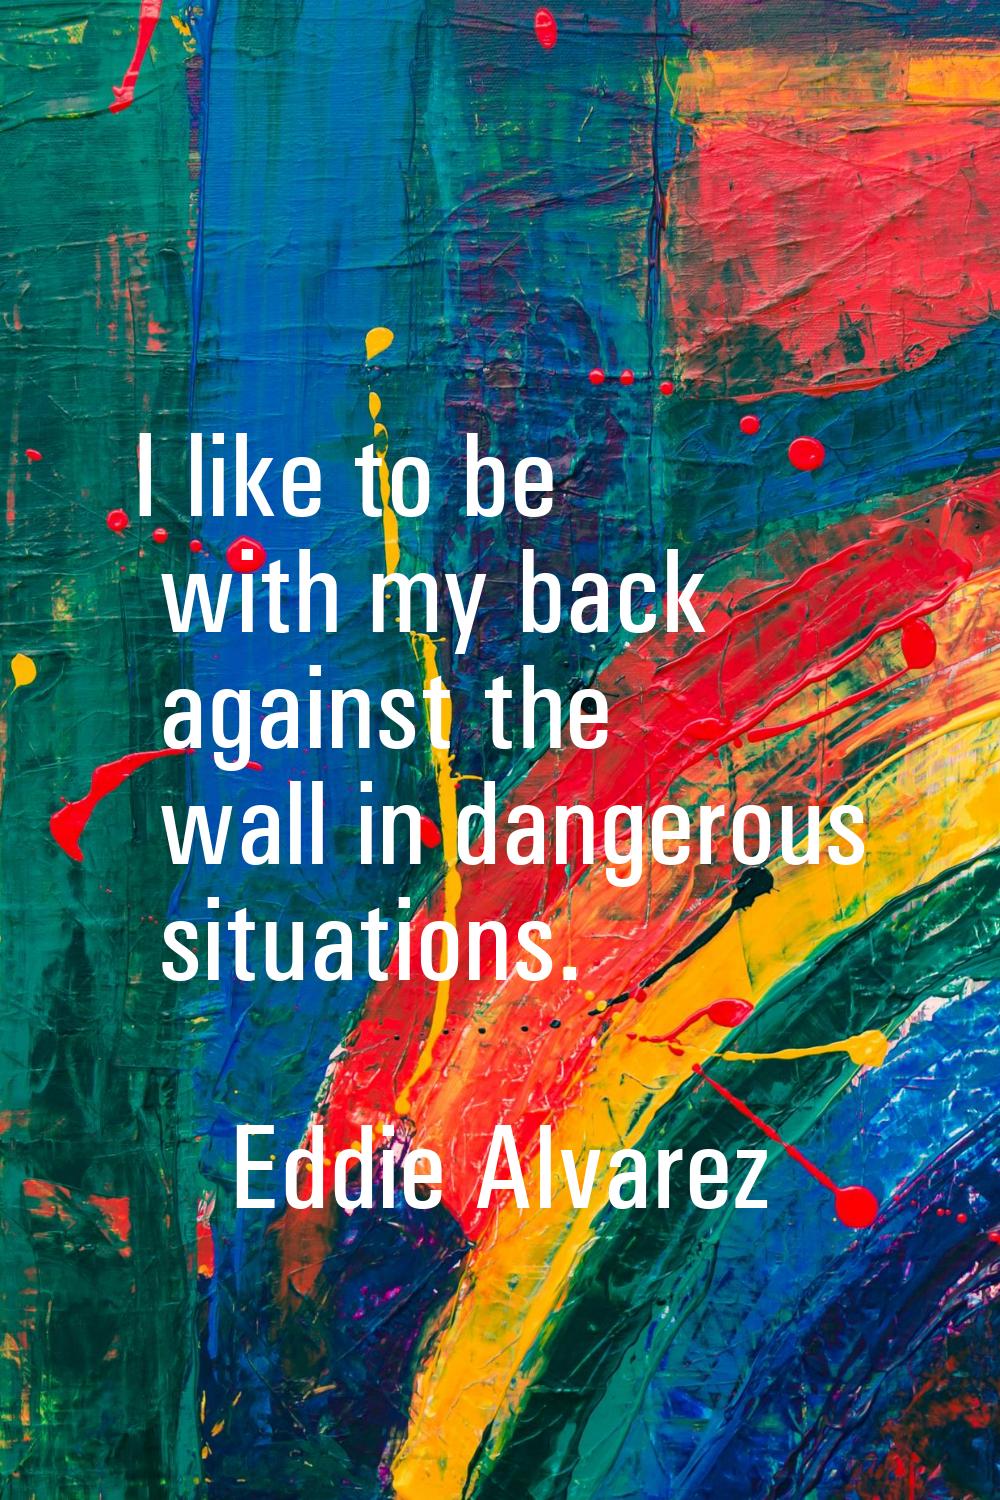 I like to be with my back against the wall in dangerous situations.